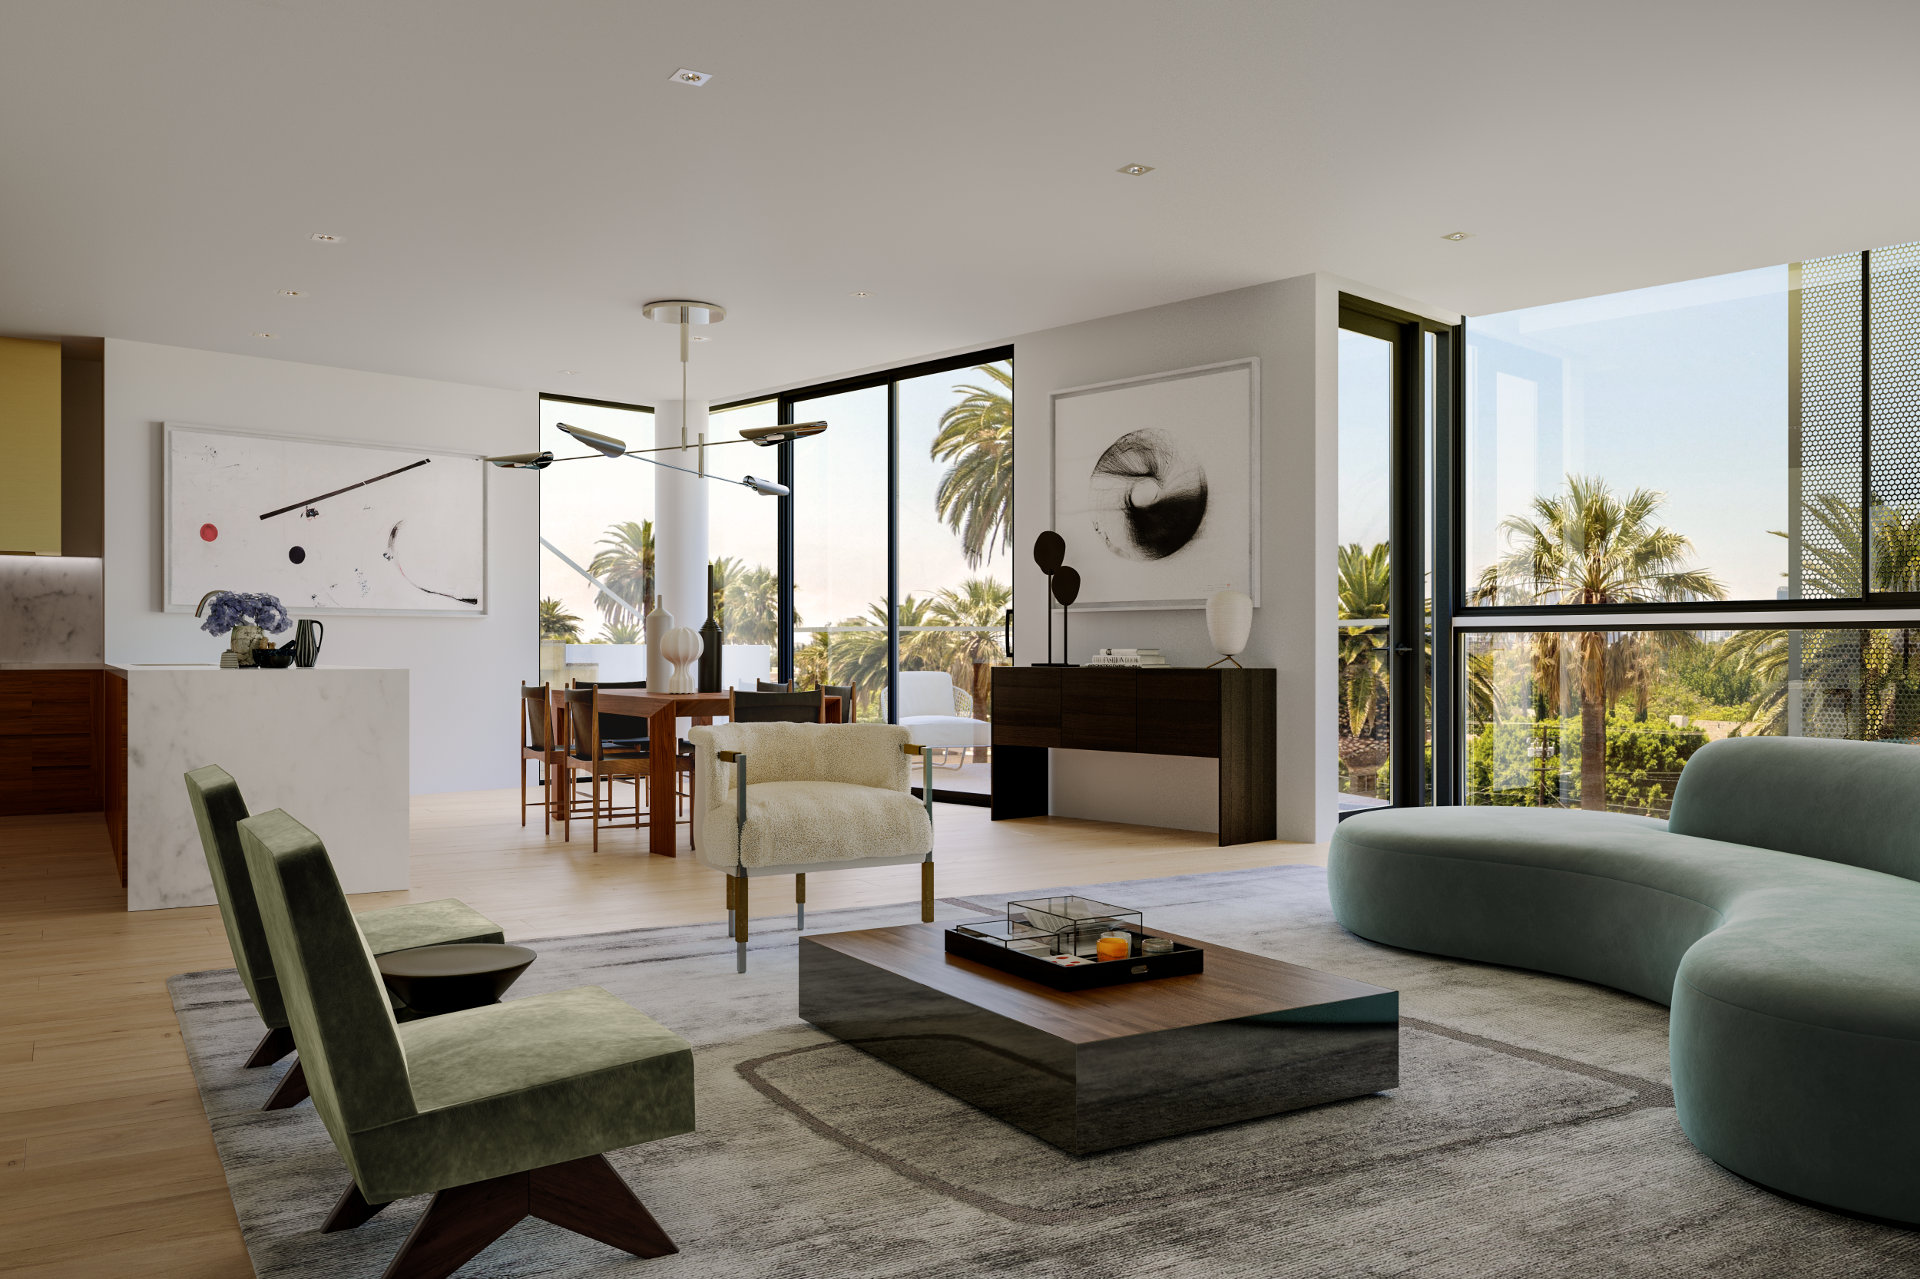 Modern living room with open-plan design, featuring contemporary furniture and large windows with a view of palm trees